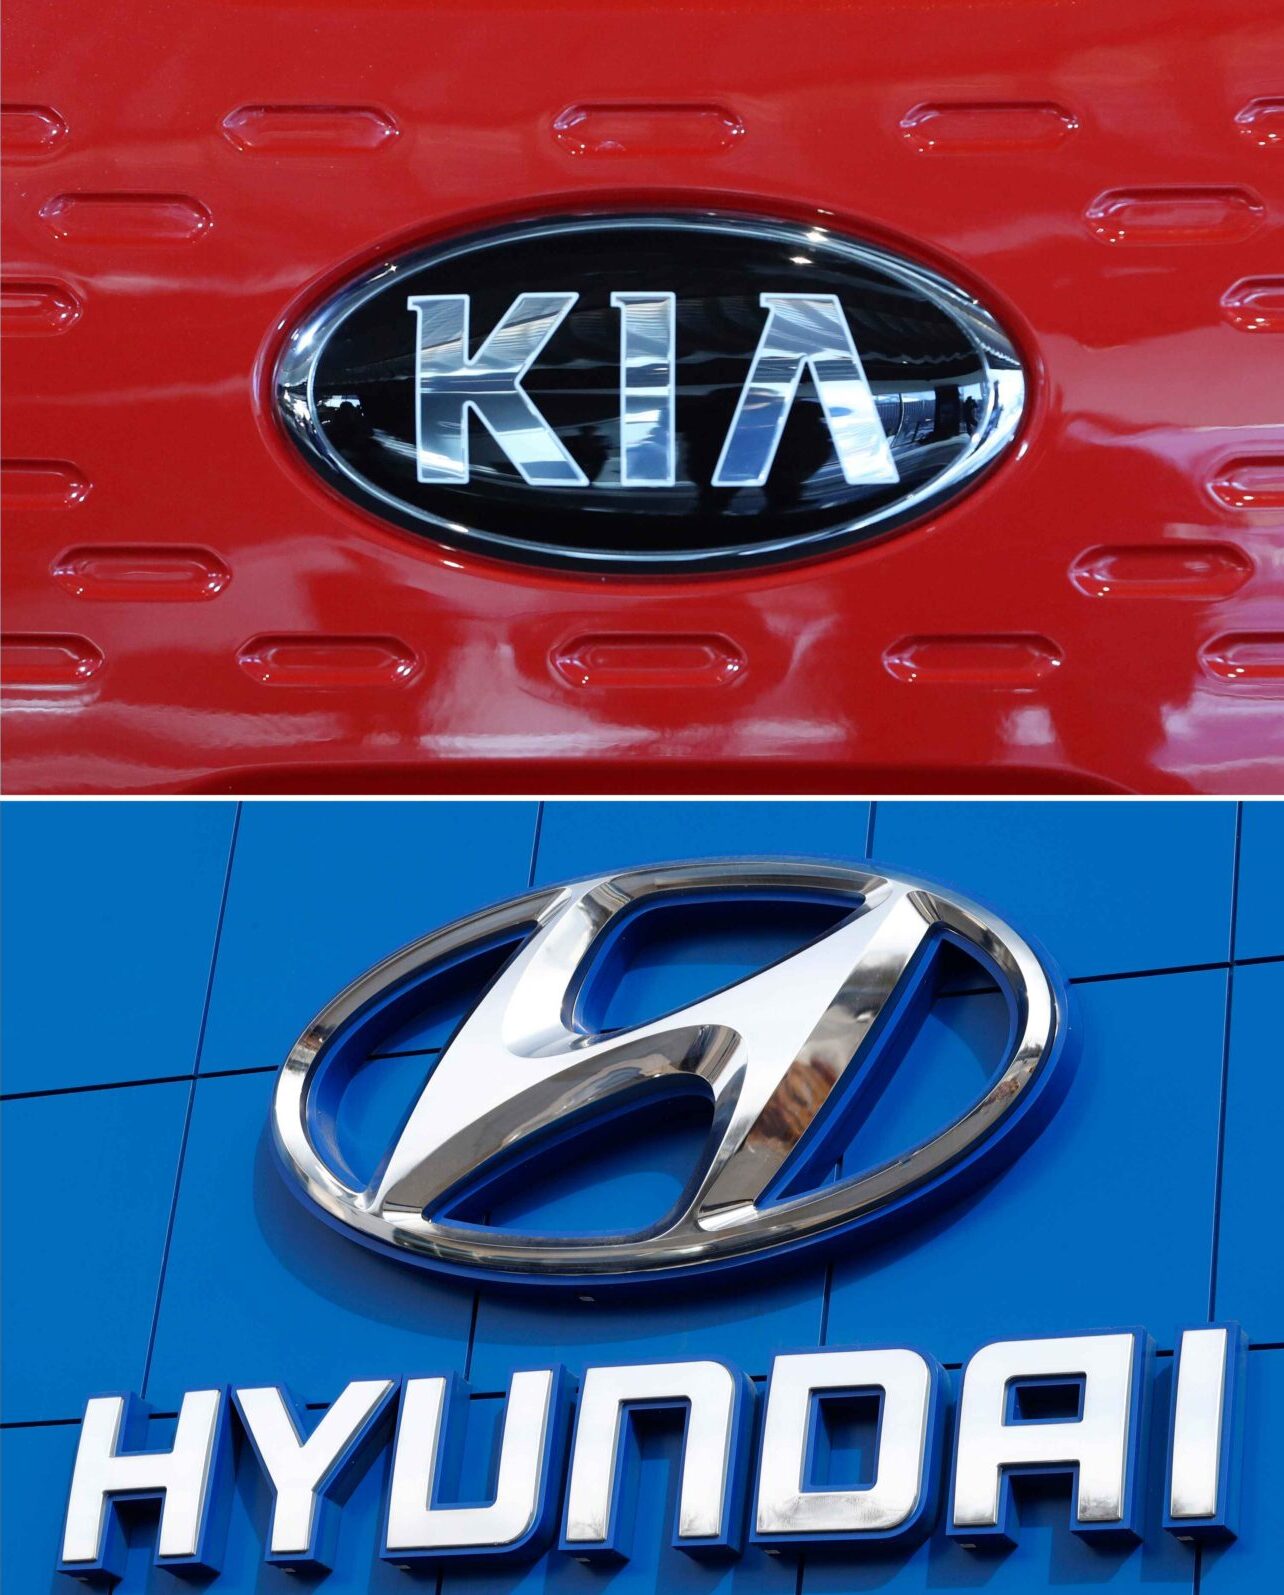 Chicago Mayor Brandon Johnson is suing Hyundai and Kia for failing to install proper anti-theft features, contributing to the city's historic crime rates. (AP Photo, File)